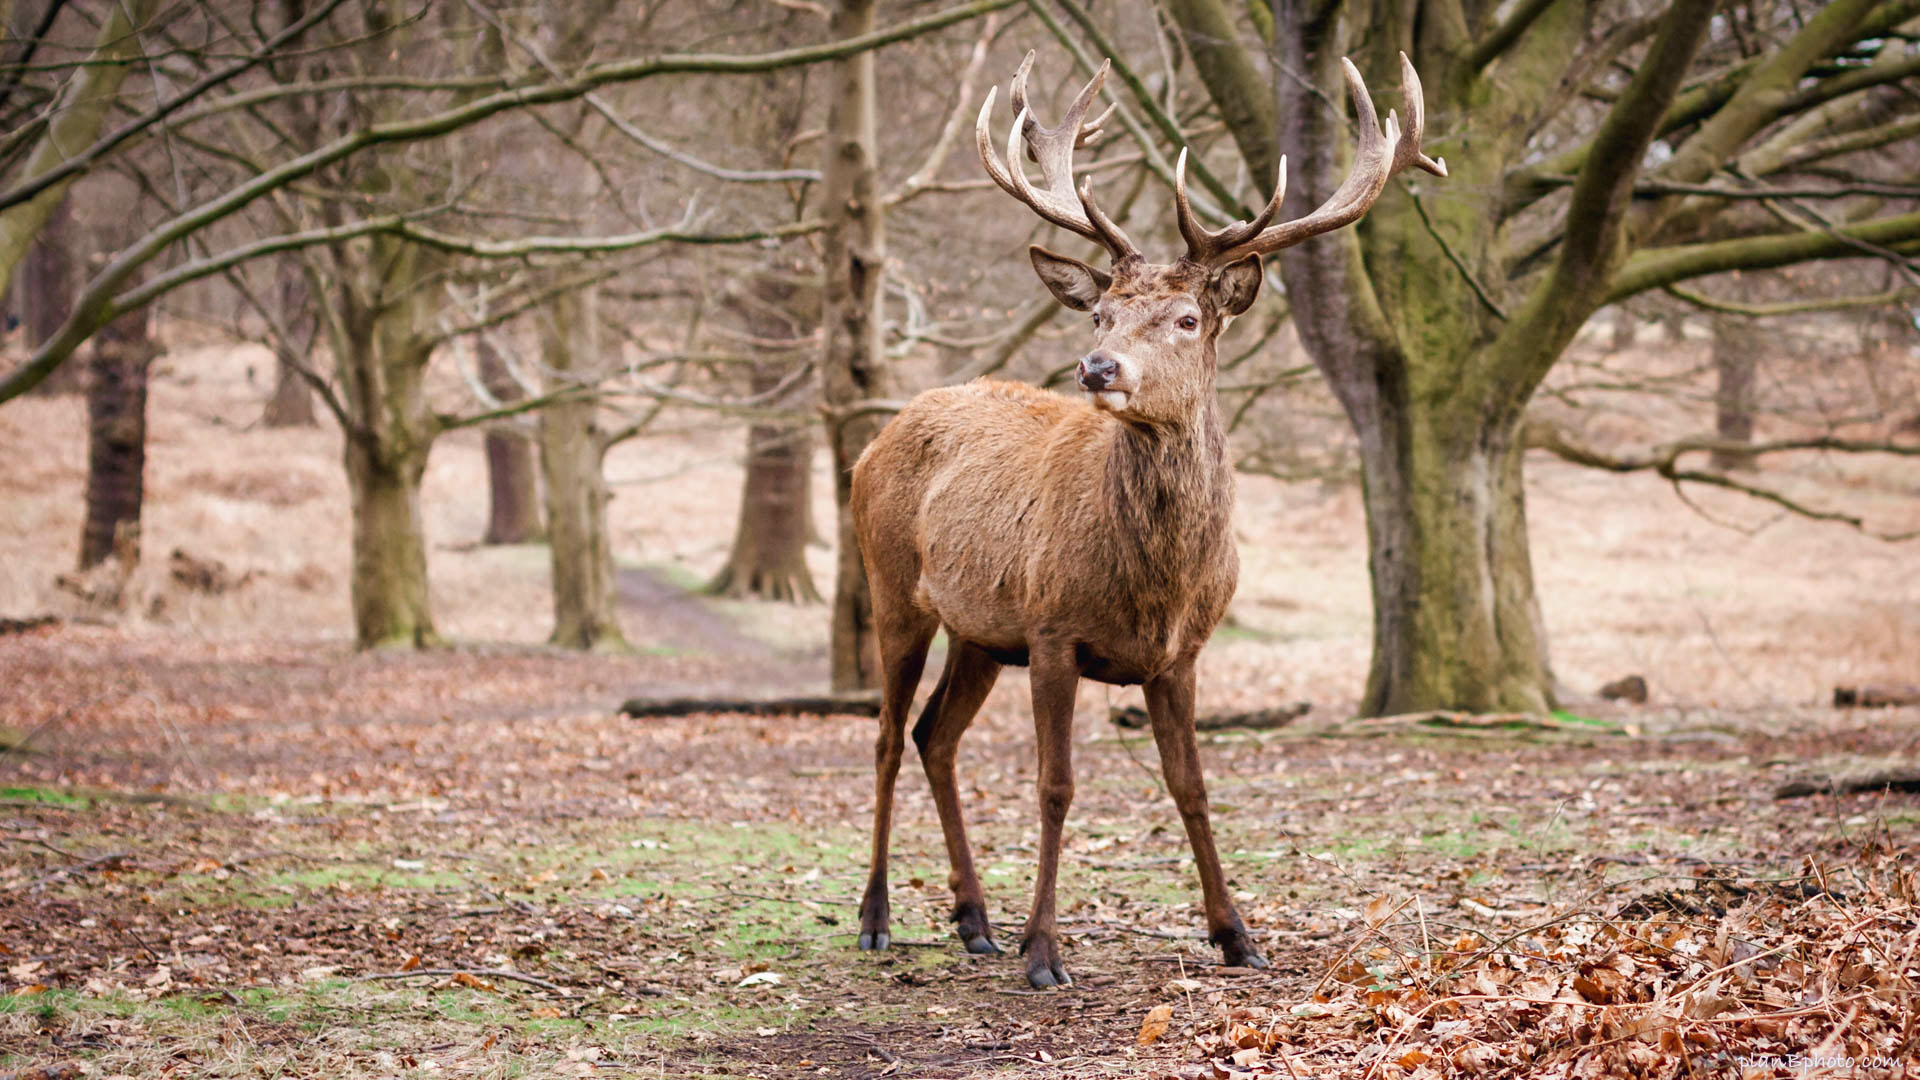 Male red deer - stag in London's royal parks